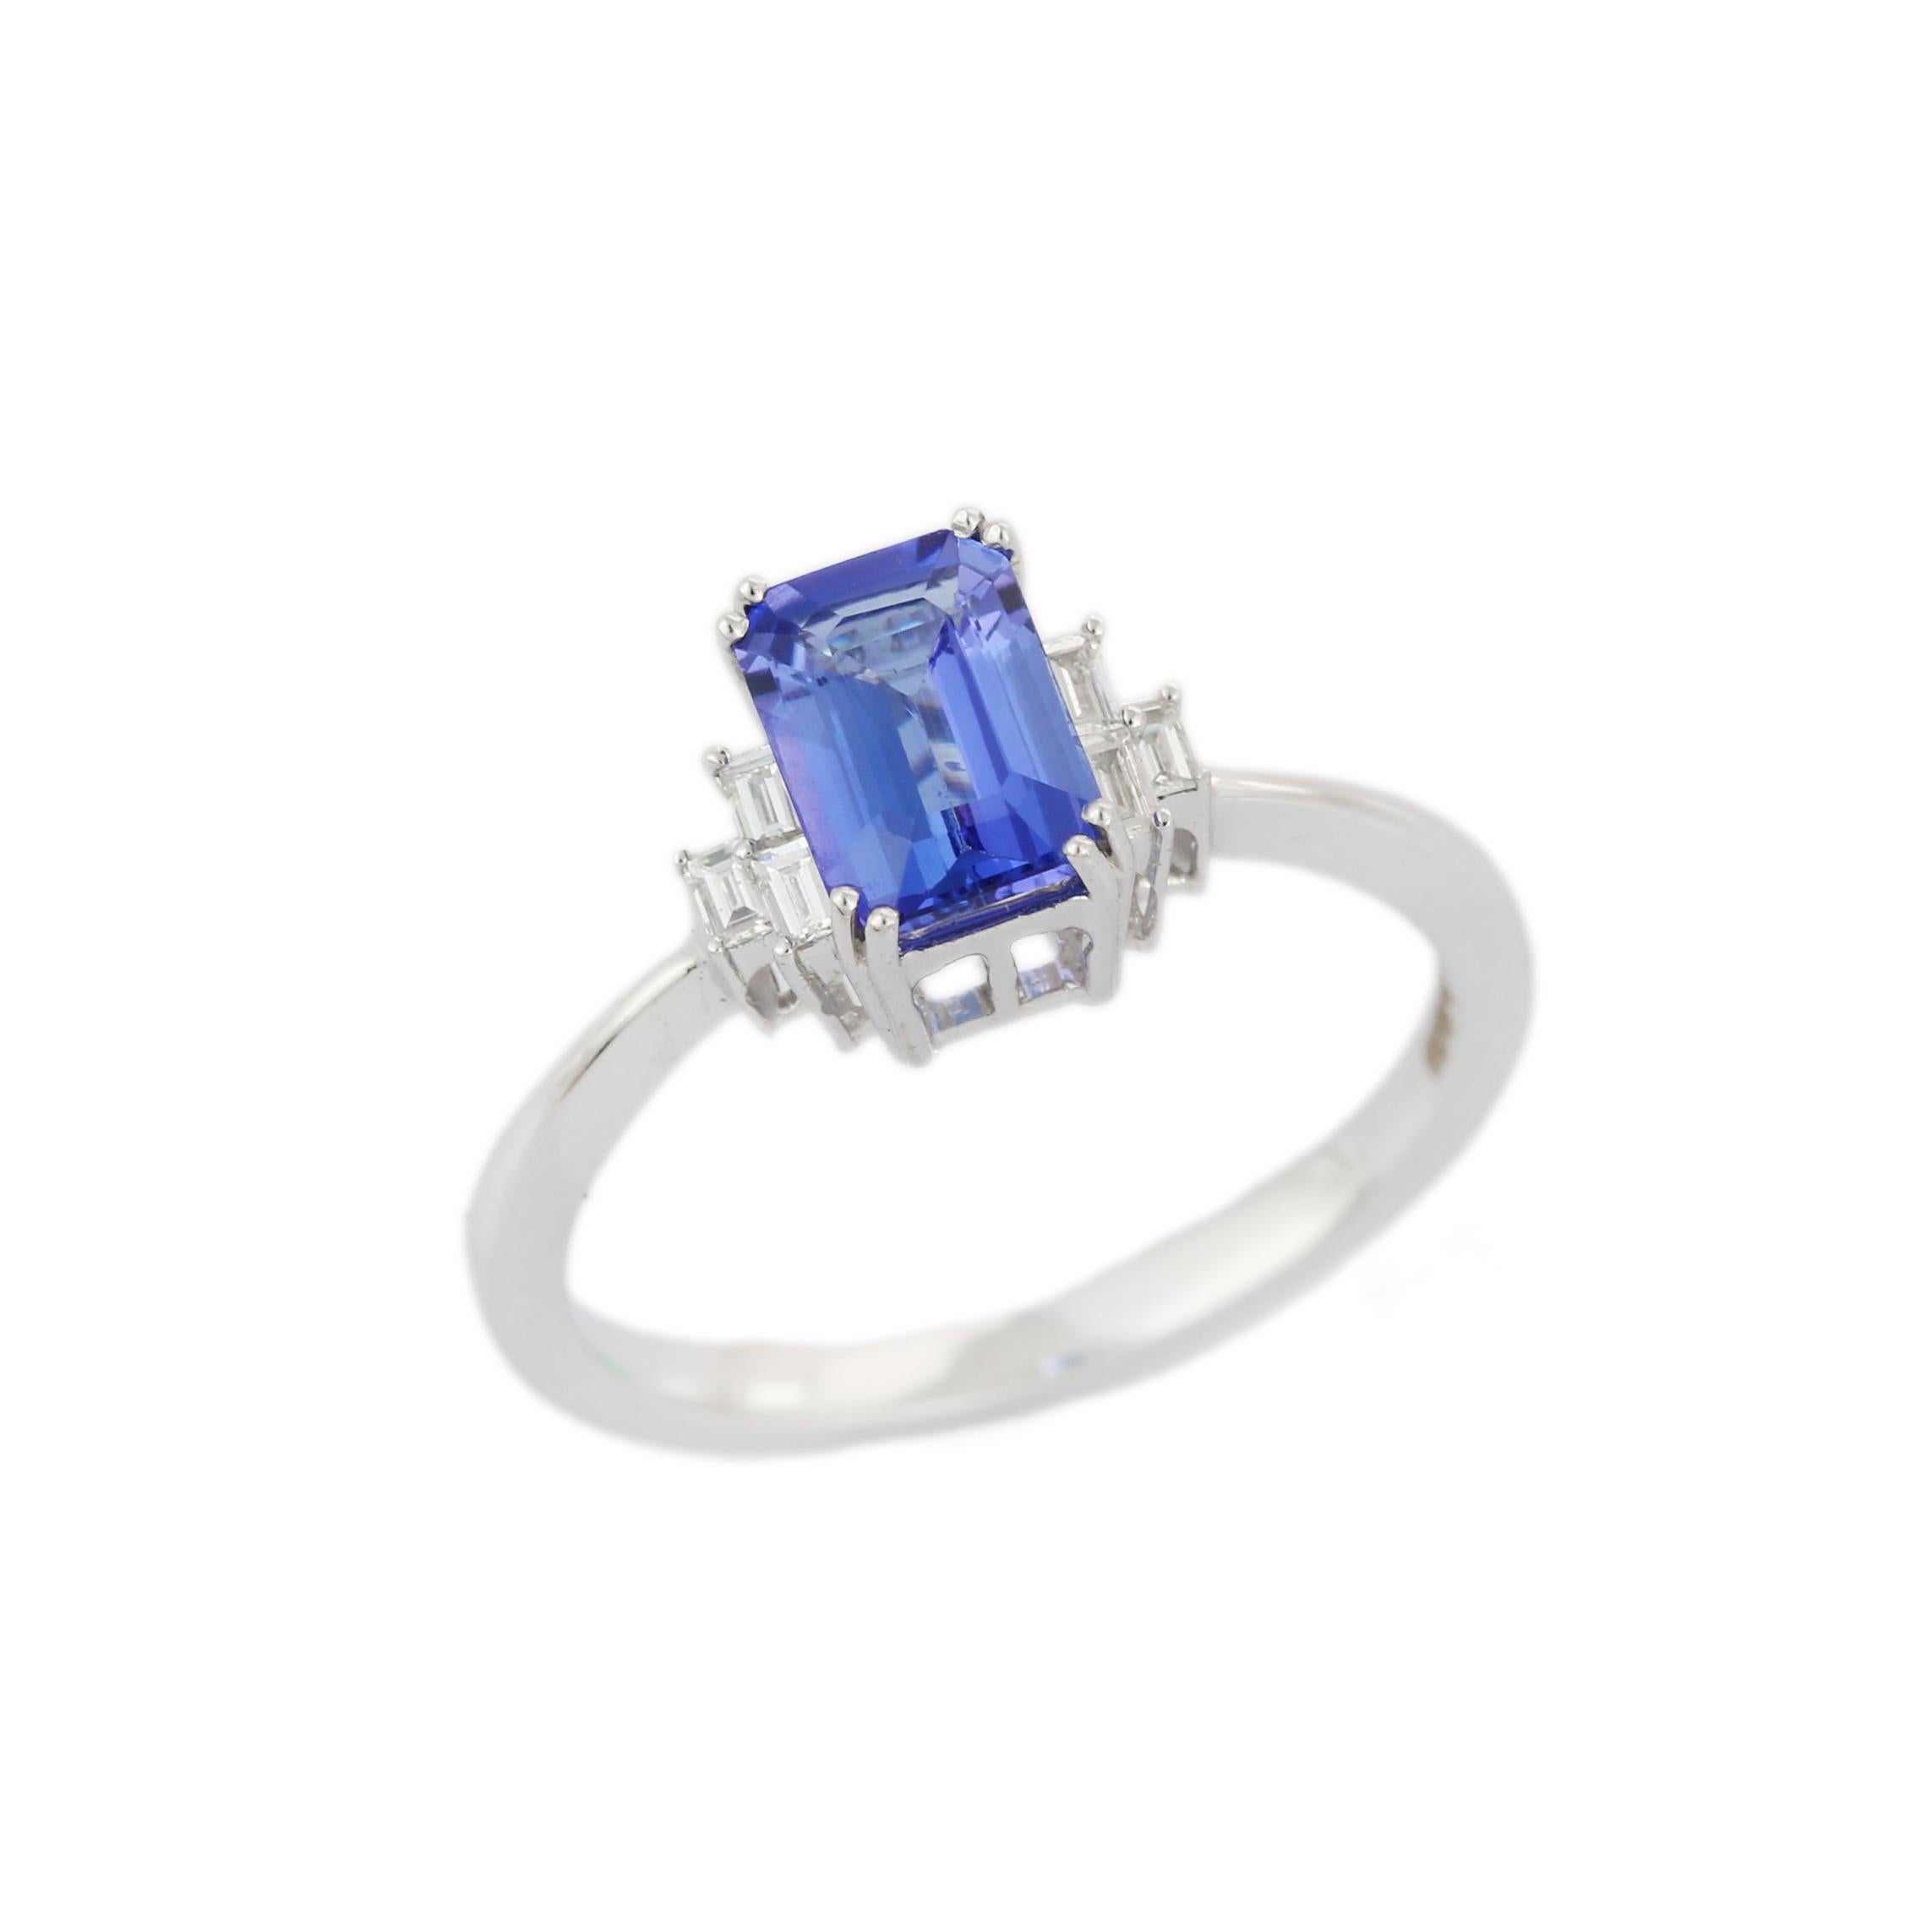 For Sale:  Octagon Shape Tanzanite Ring with Diamonds in 18K White Gold 3